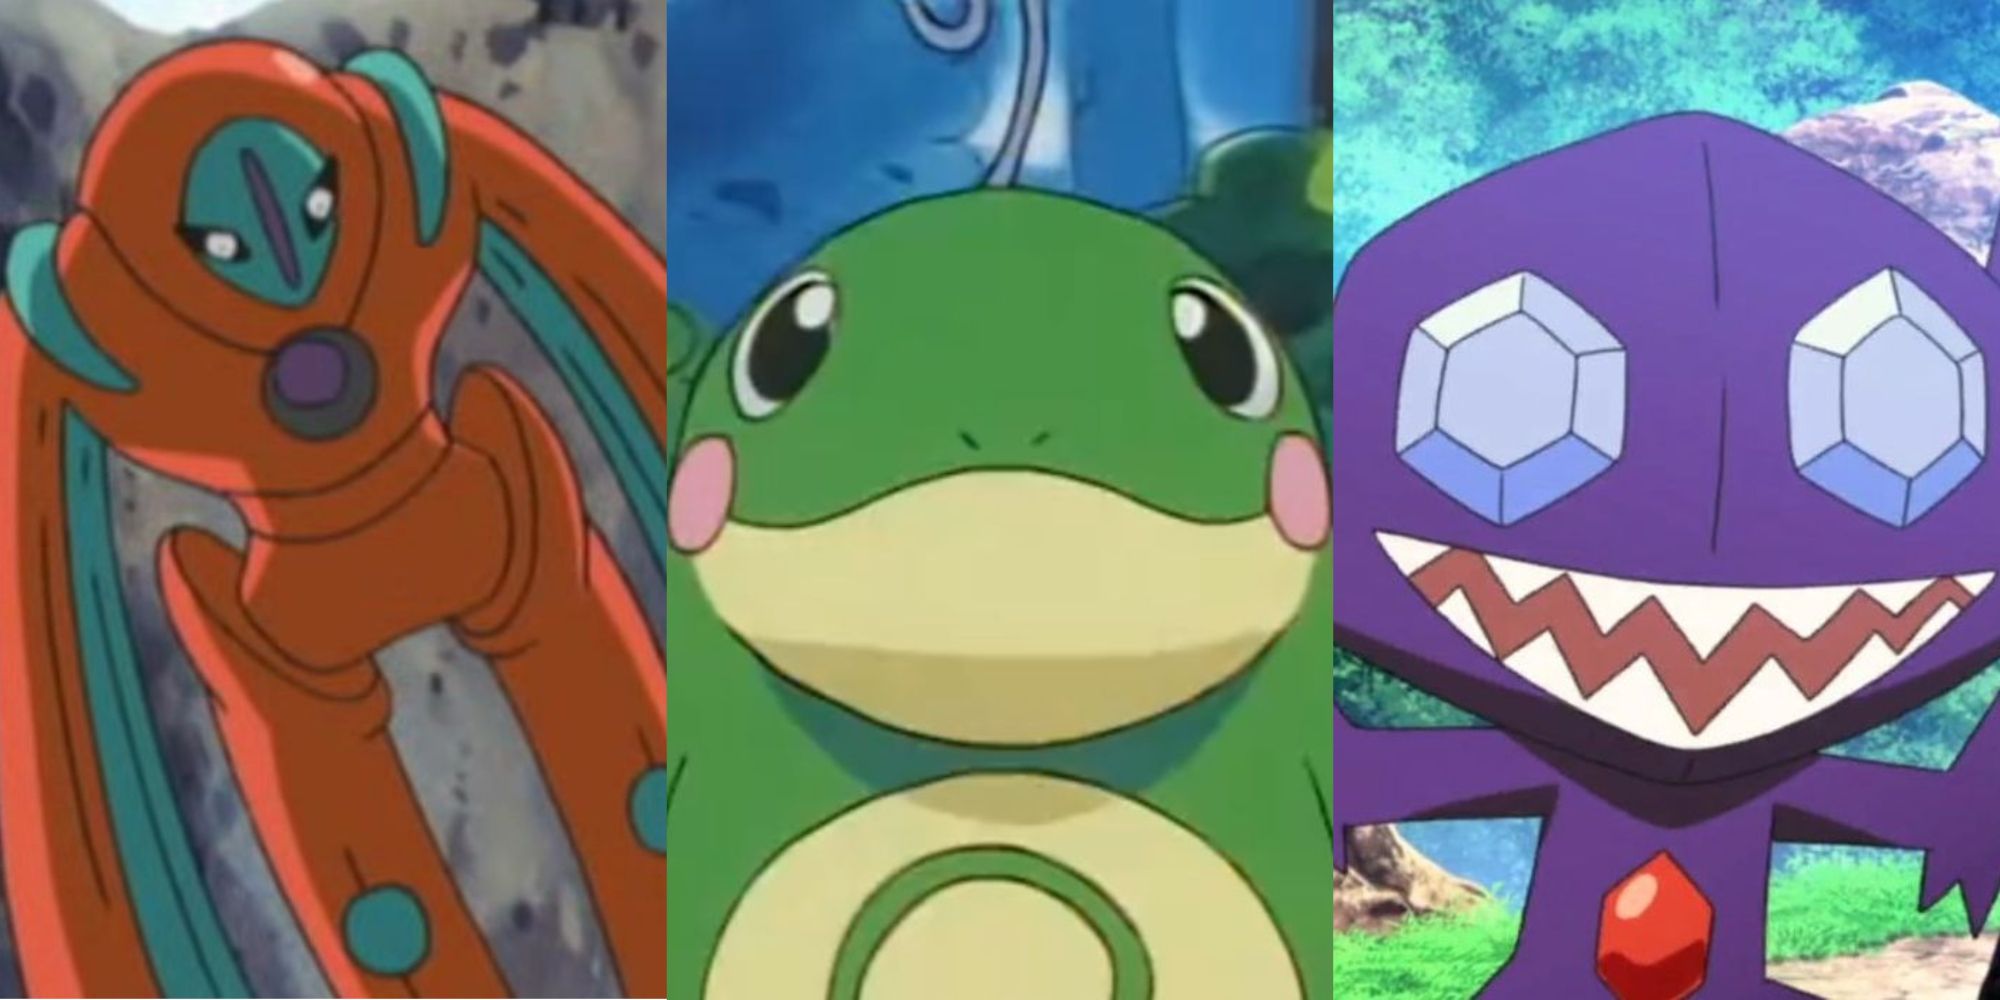 Collage of Deoxys, Politoed and Sableye from the Pokemon Anime